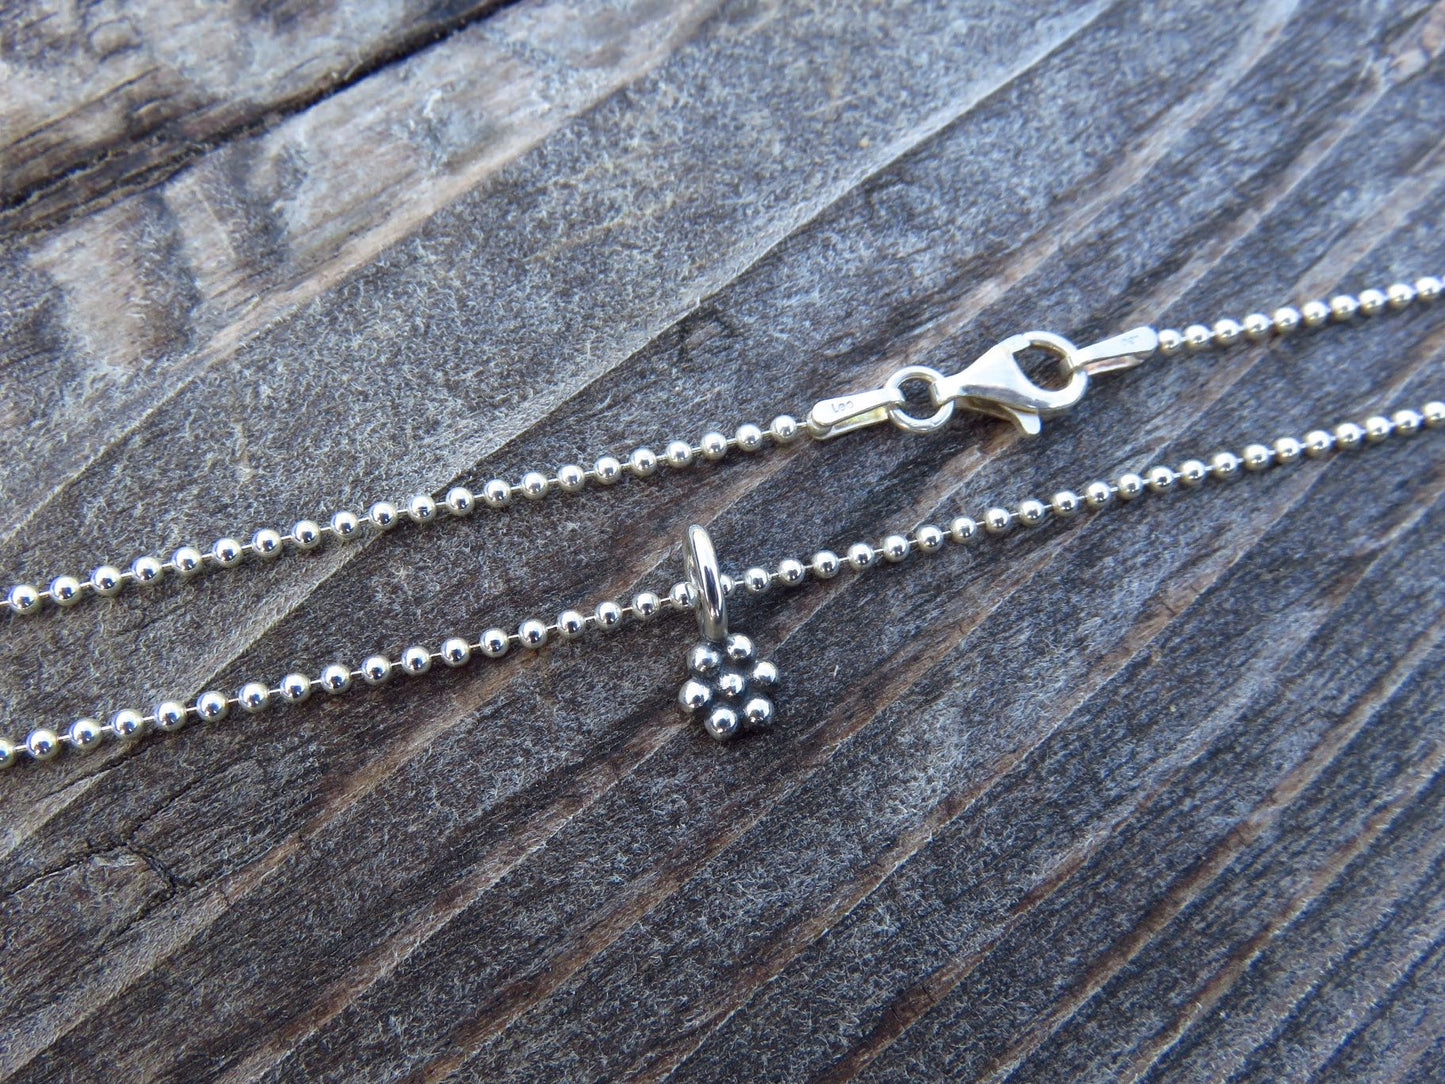 Ball chain with flower pendant made of silver